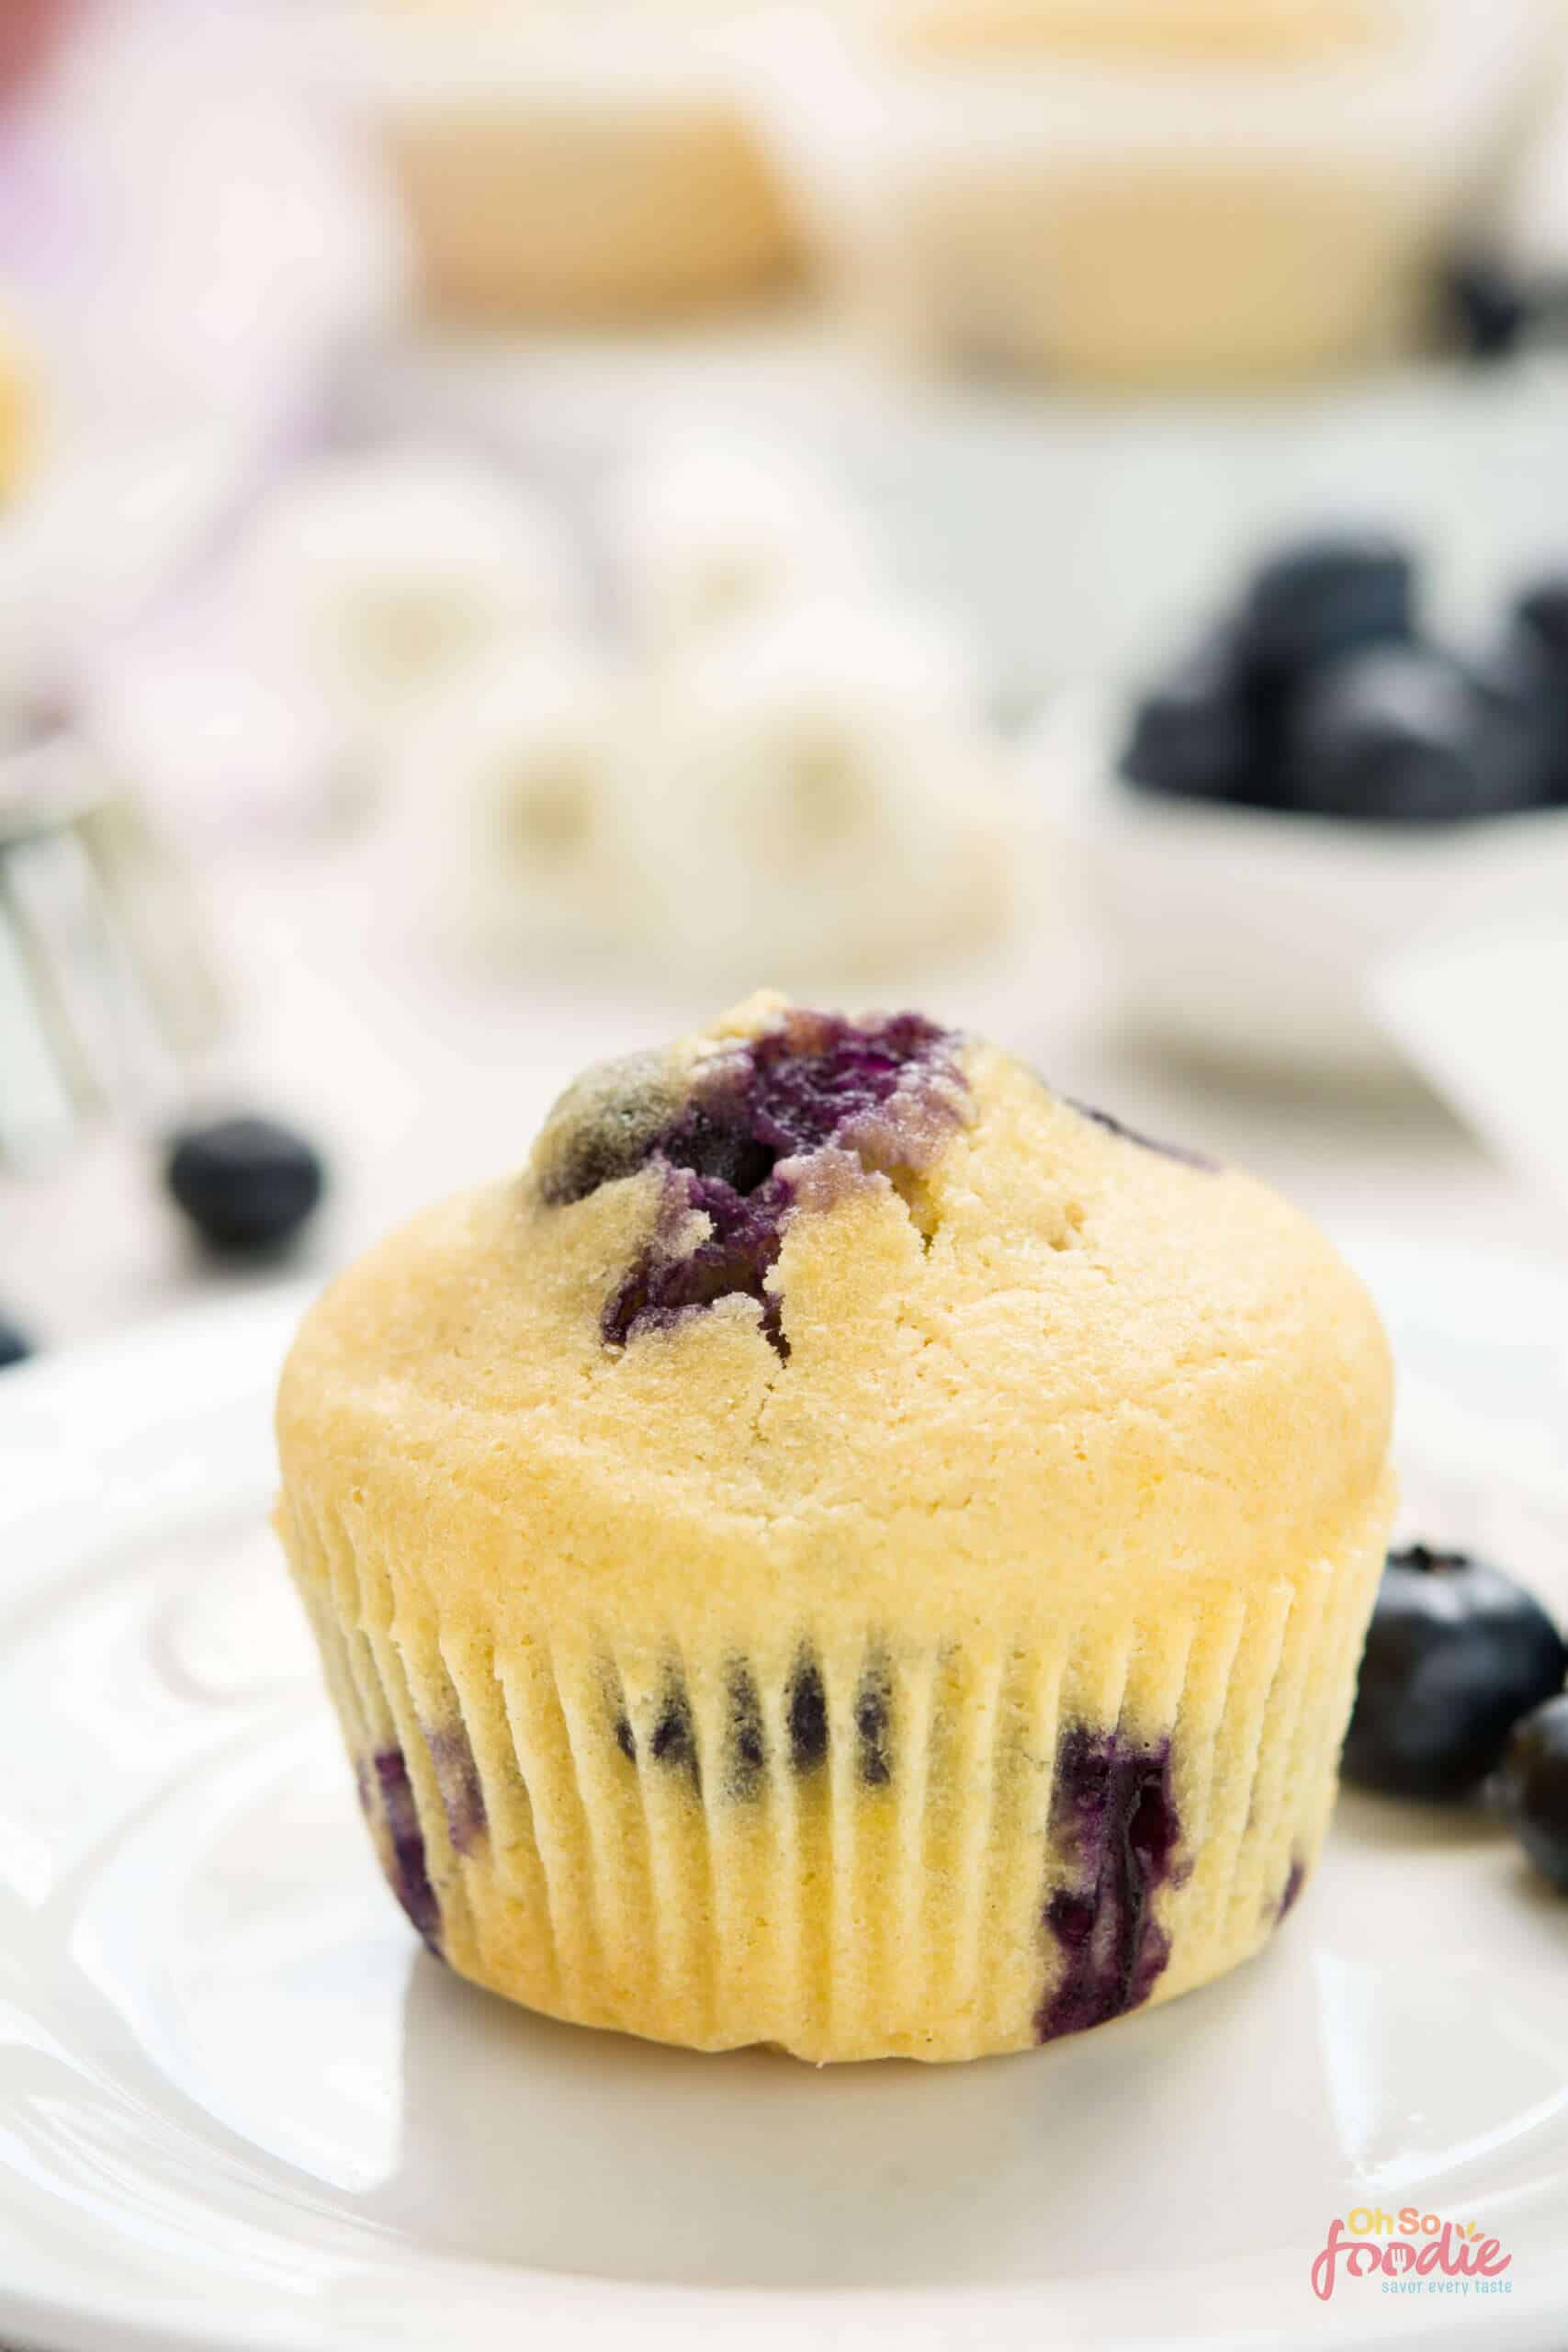 12 Best Ways To Substitute For Milk In Muffins - Oh So Foodie